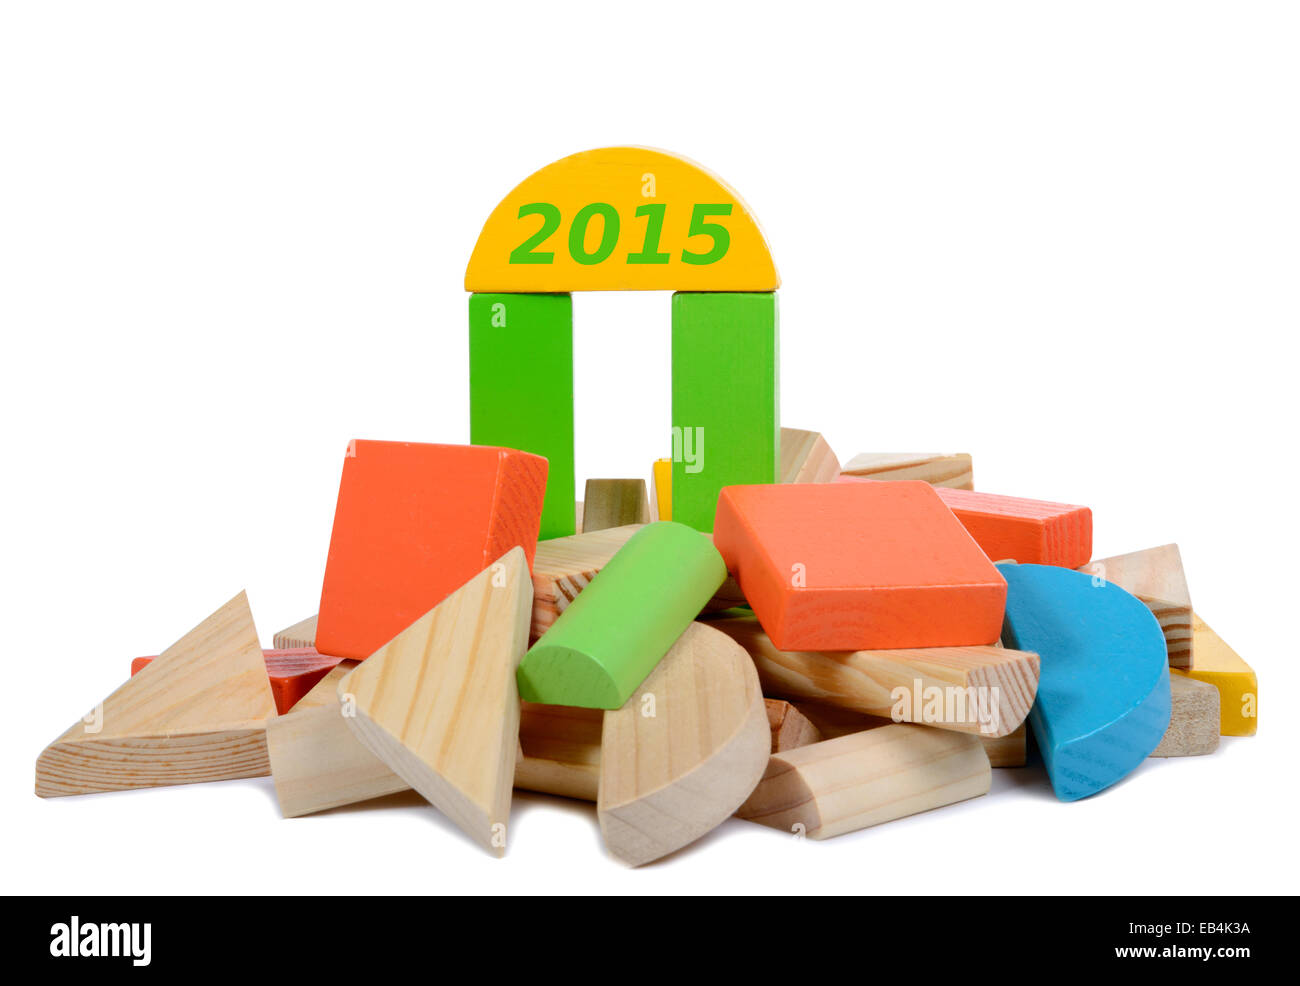 Wooden construction toy 2015 on white background Stock Photo